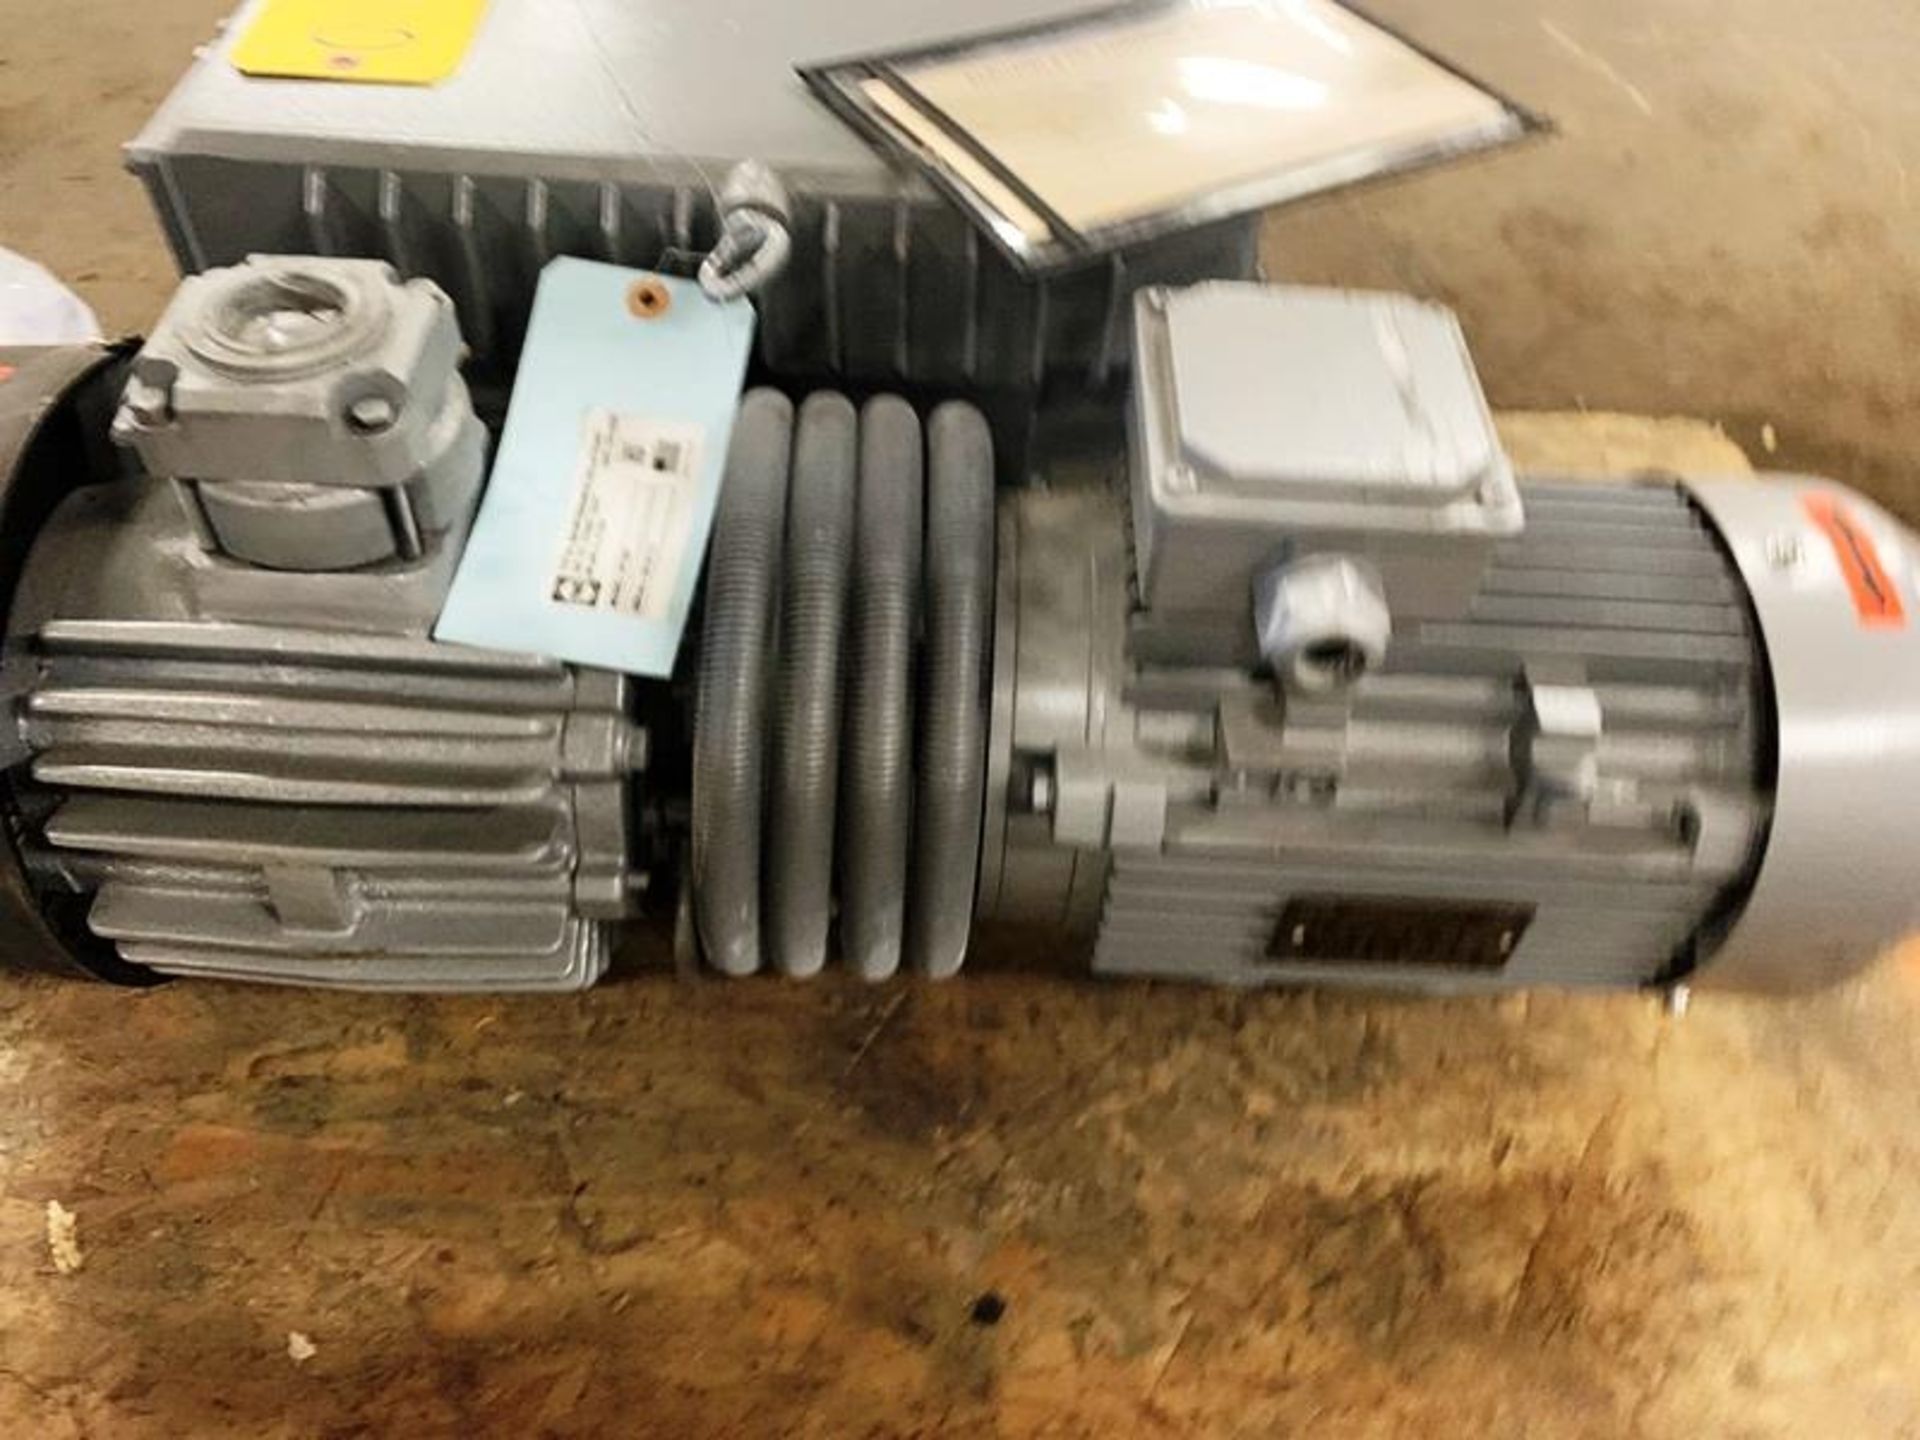 New SV Series Rotary Vane Vacuum Pump, Ser. #5610092, 3 phase, 230/460 volts, new air filter (1) - Image 5 of 6